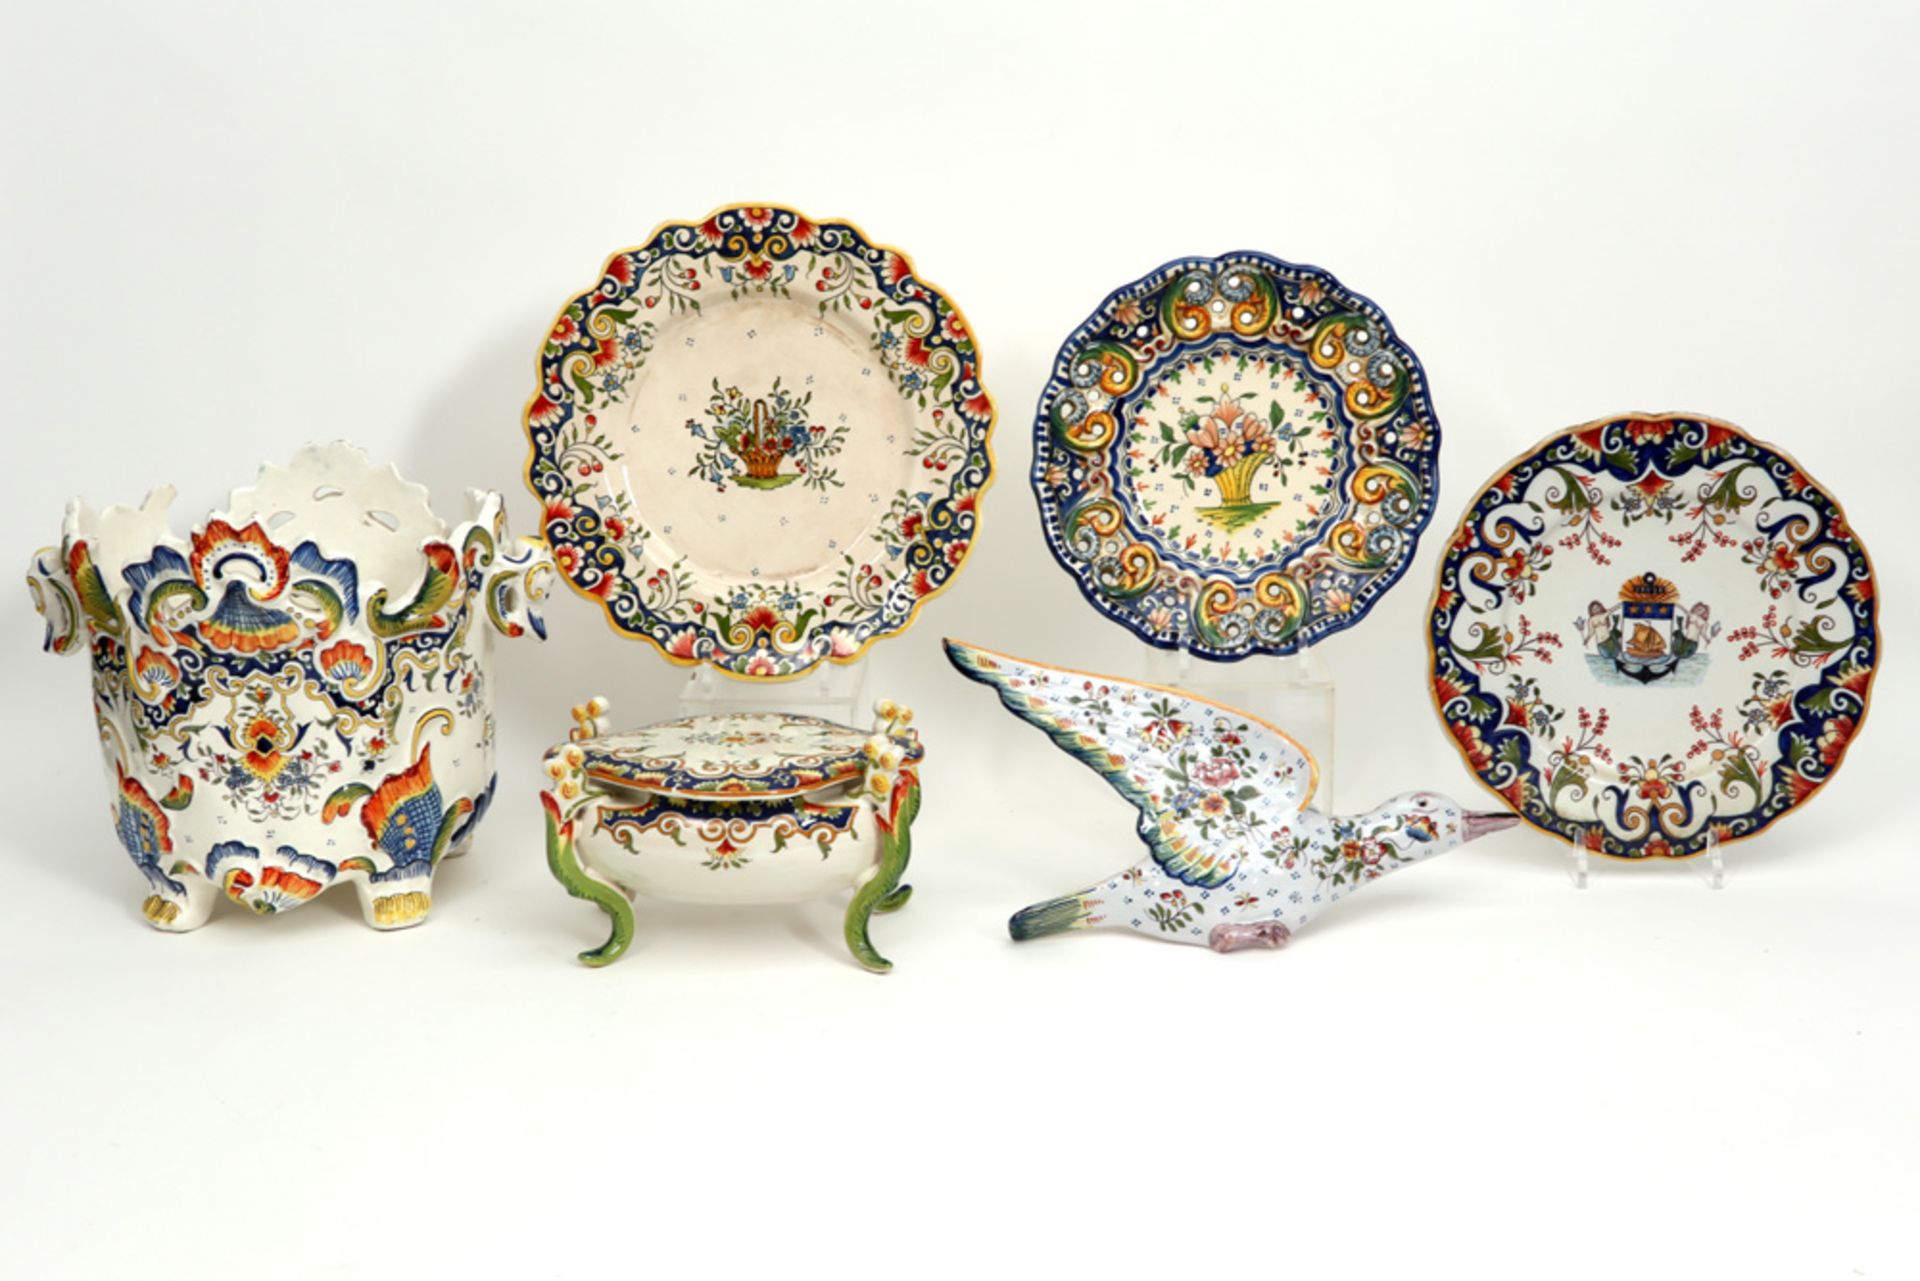 six pieces of French ceramic from Rouen with polychrome decors